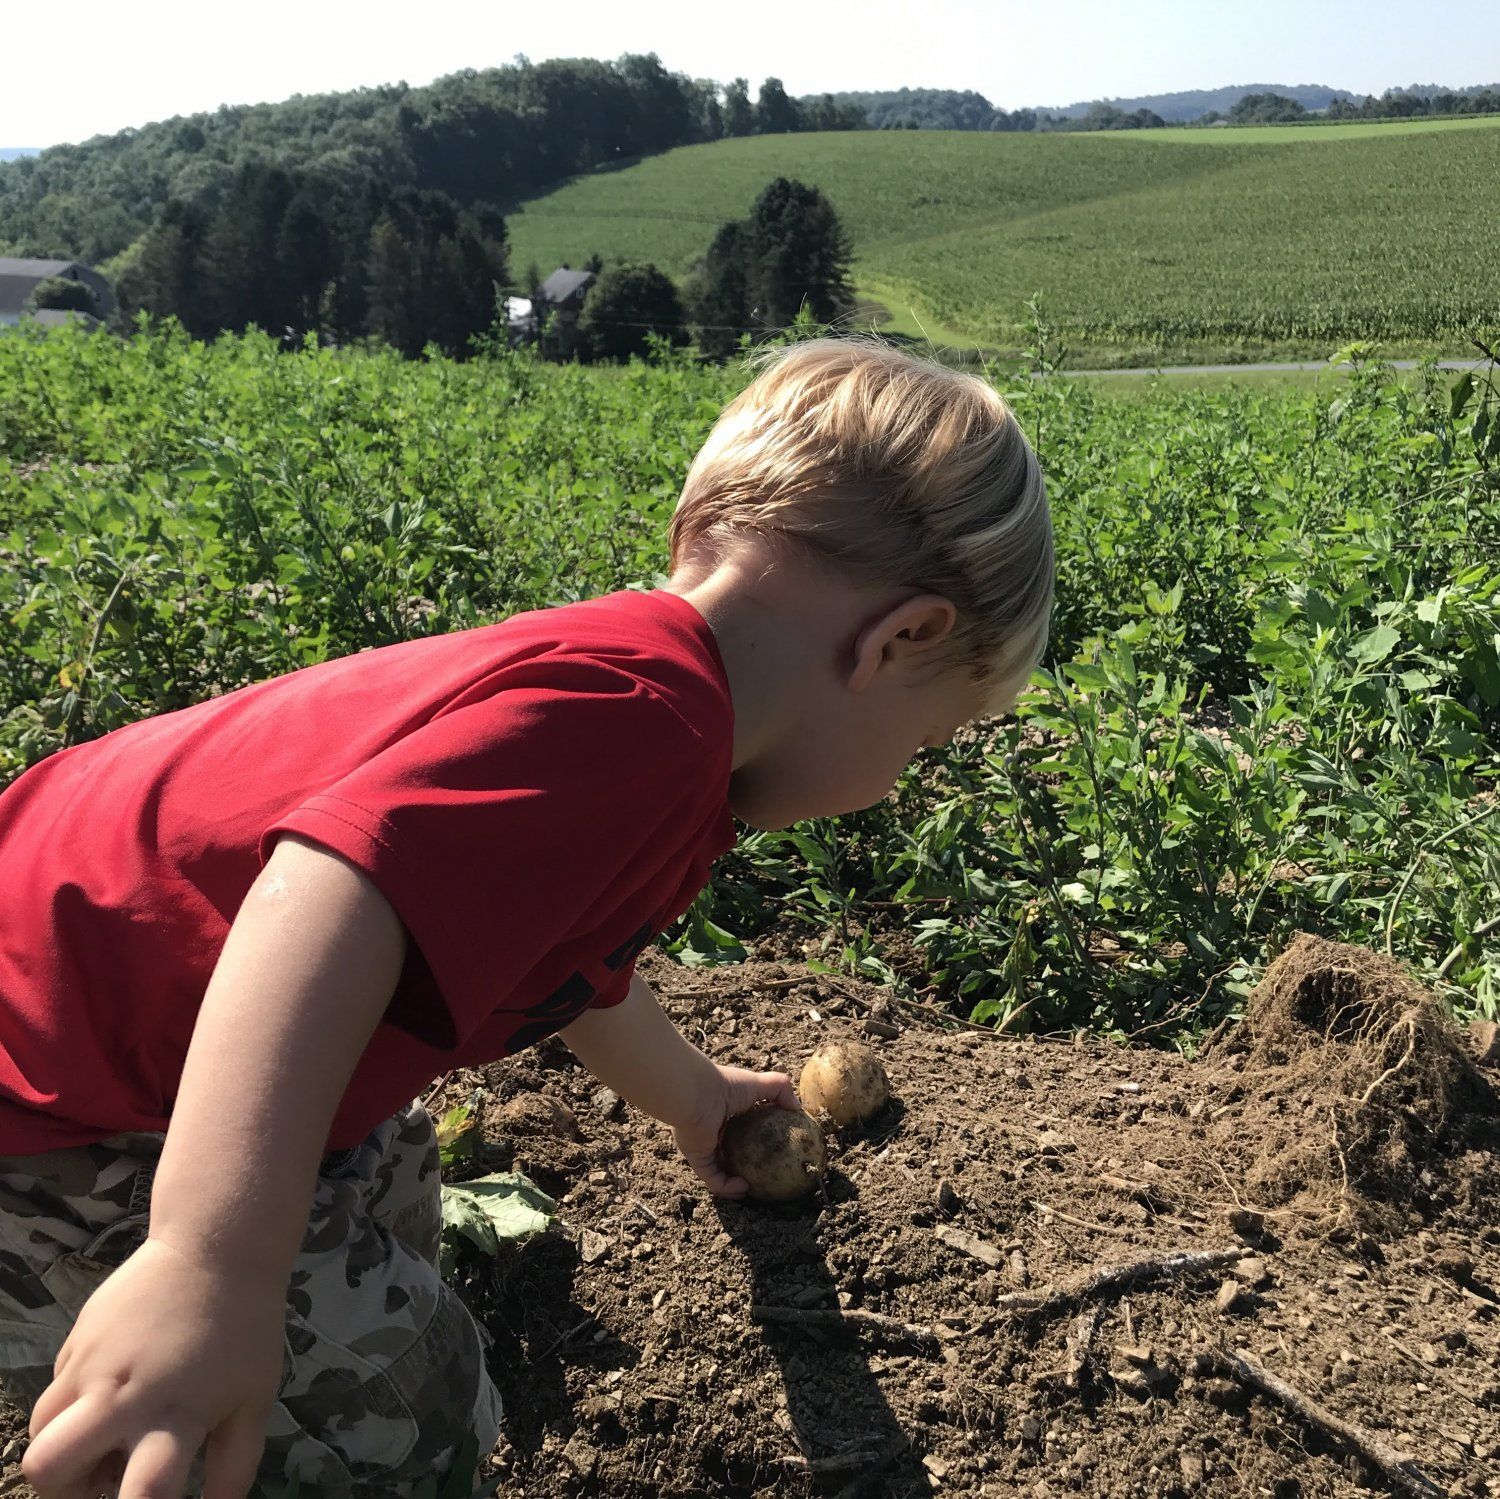 Next Happening: Picking Potatoes begins in July +  Last Pizza Night